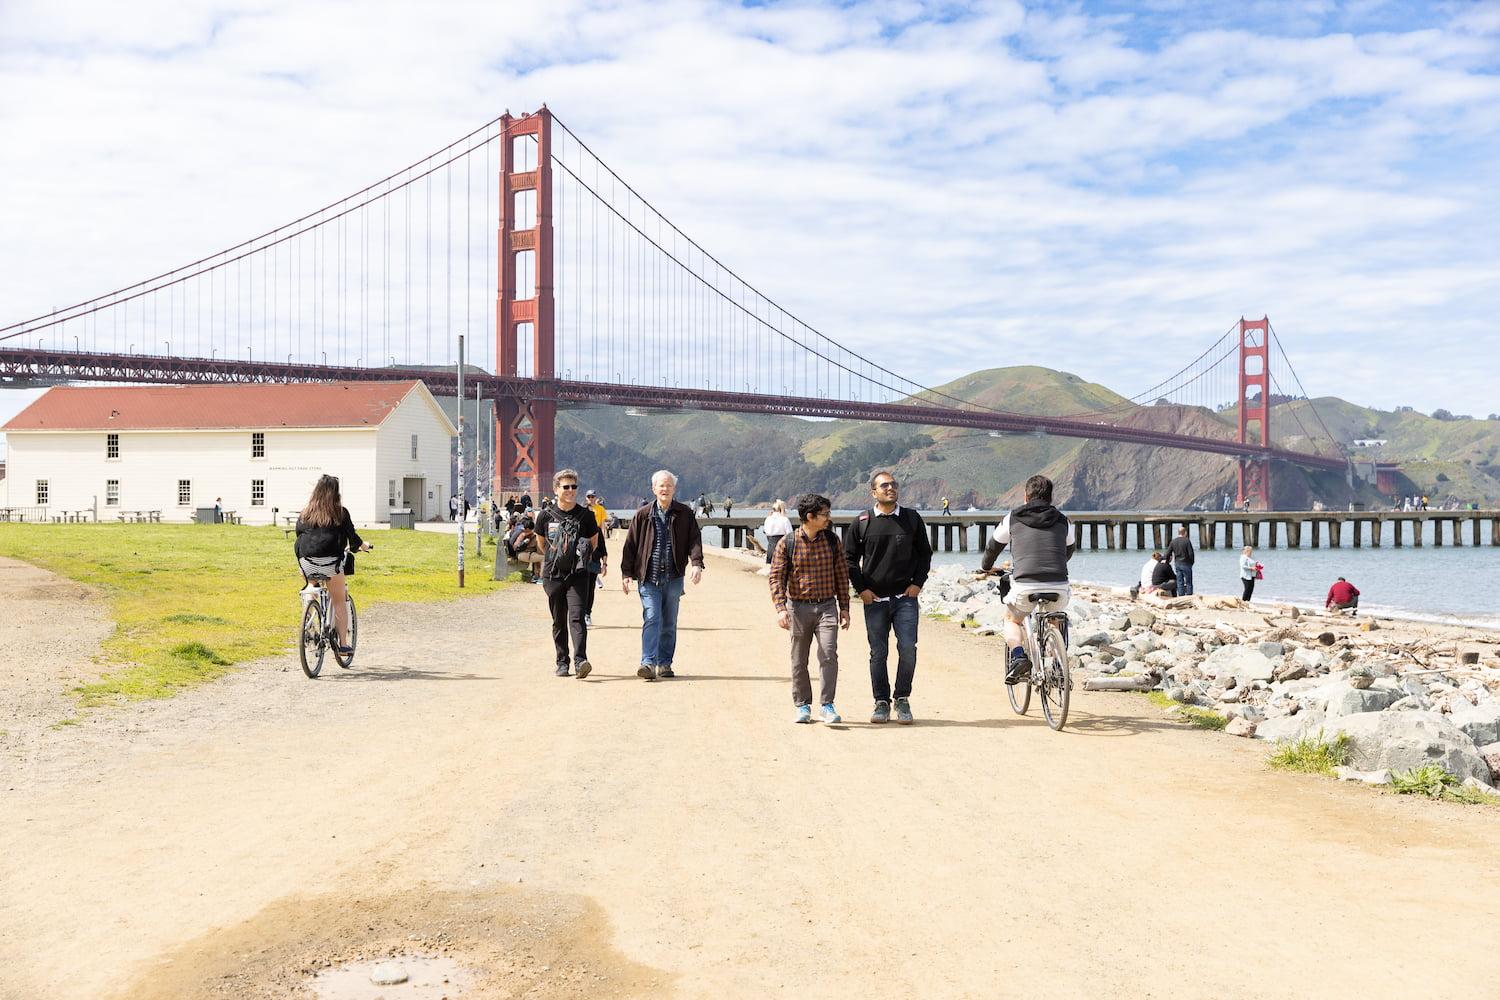 A group of people walking or bike riding on Golden Gate Promenade near the Warming Hut.